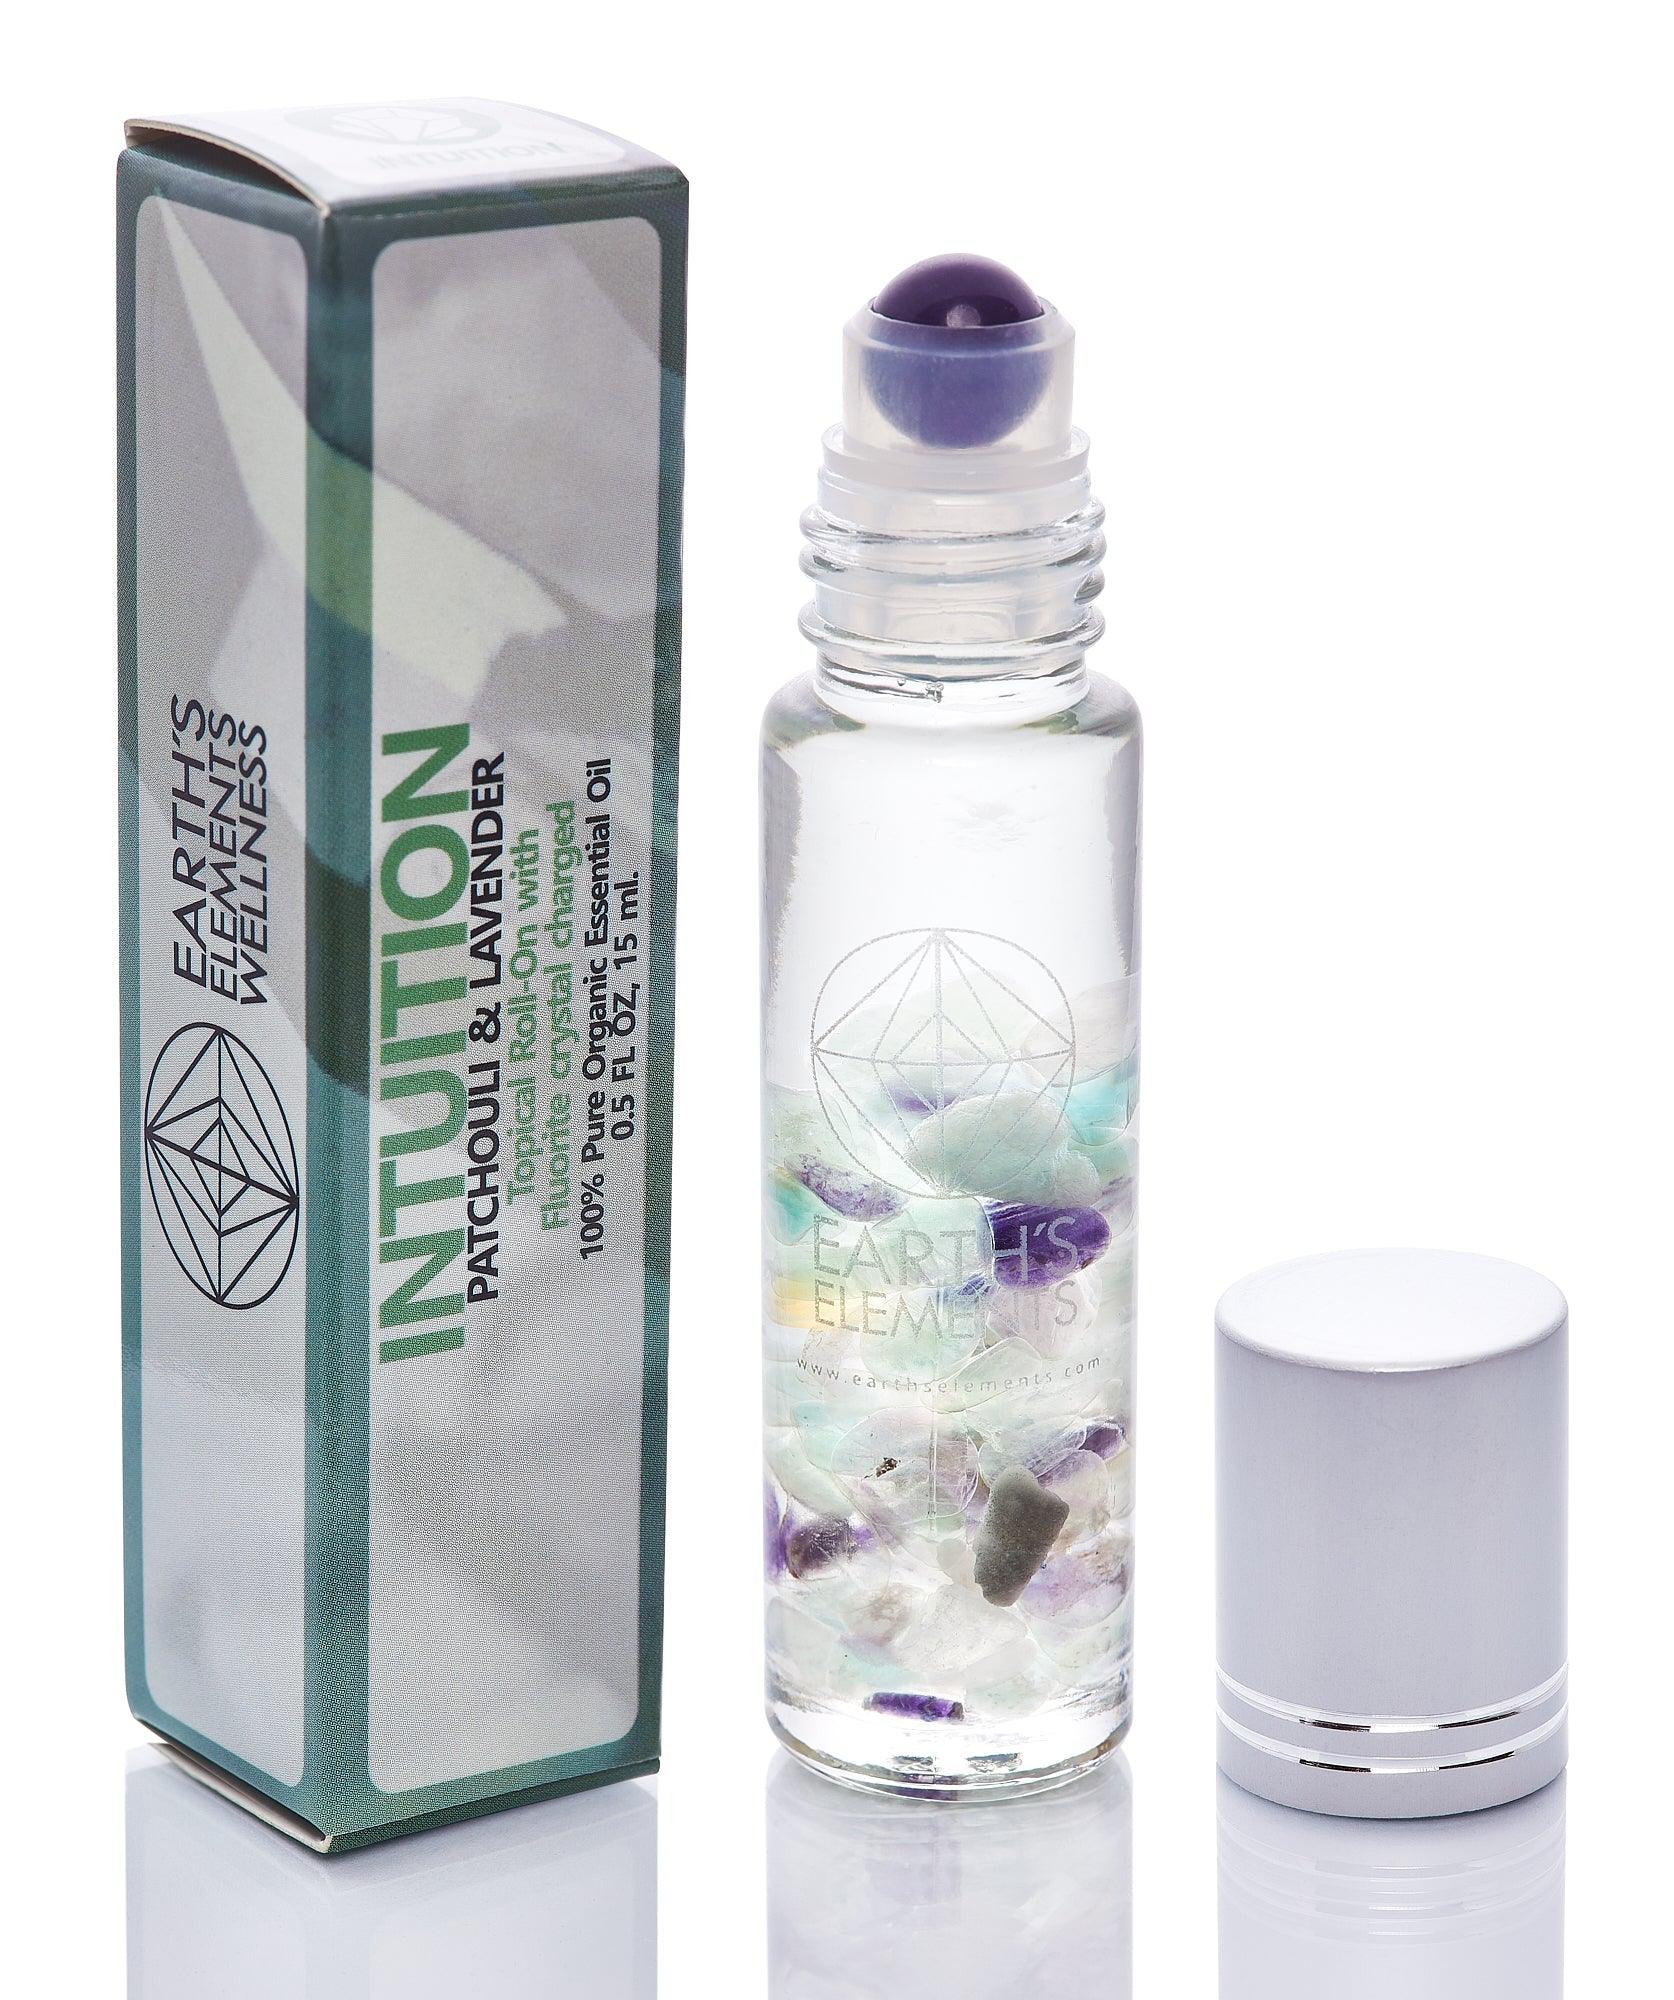 Intuition - Aromatherapy & Crystal Organic Roll On - The Rutile Ltd